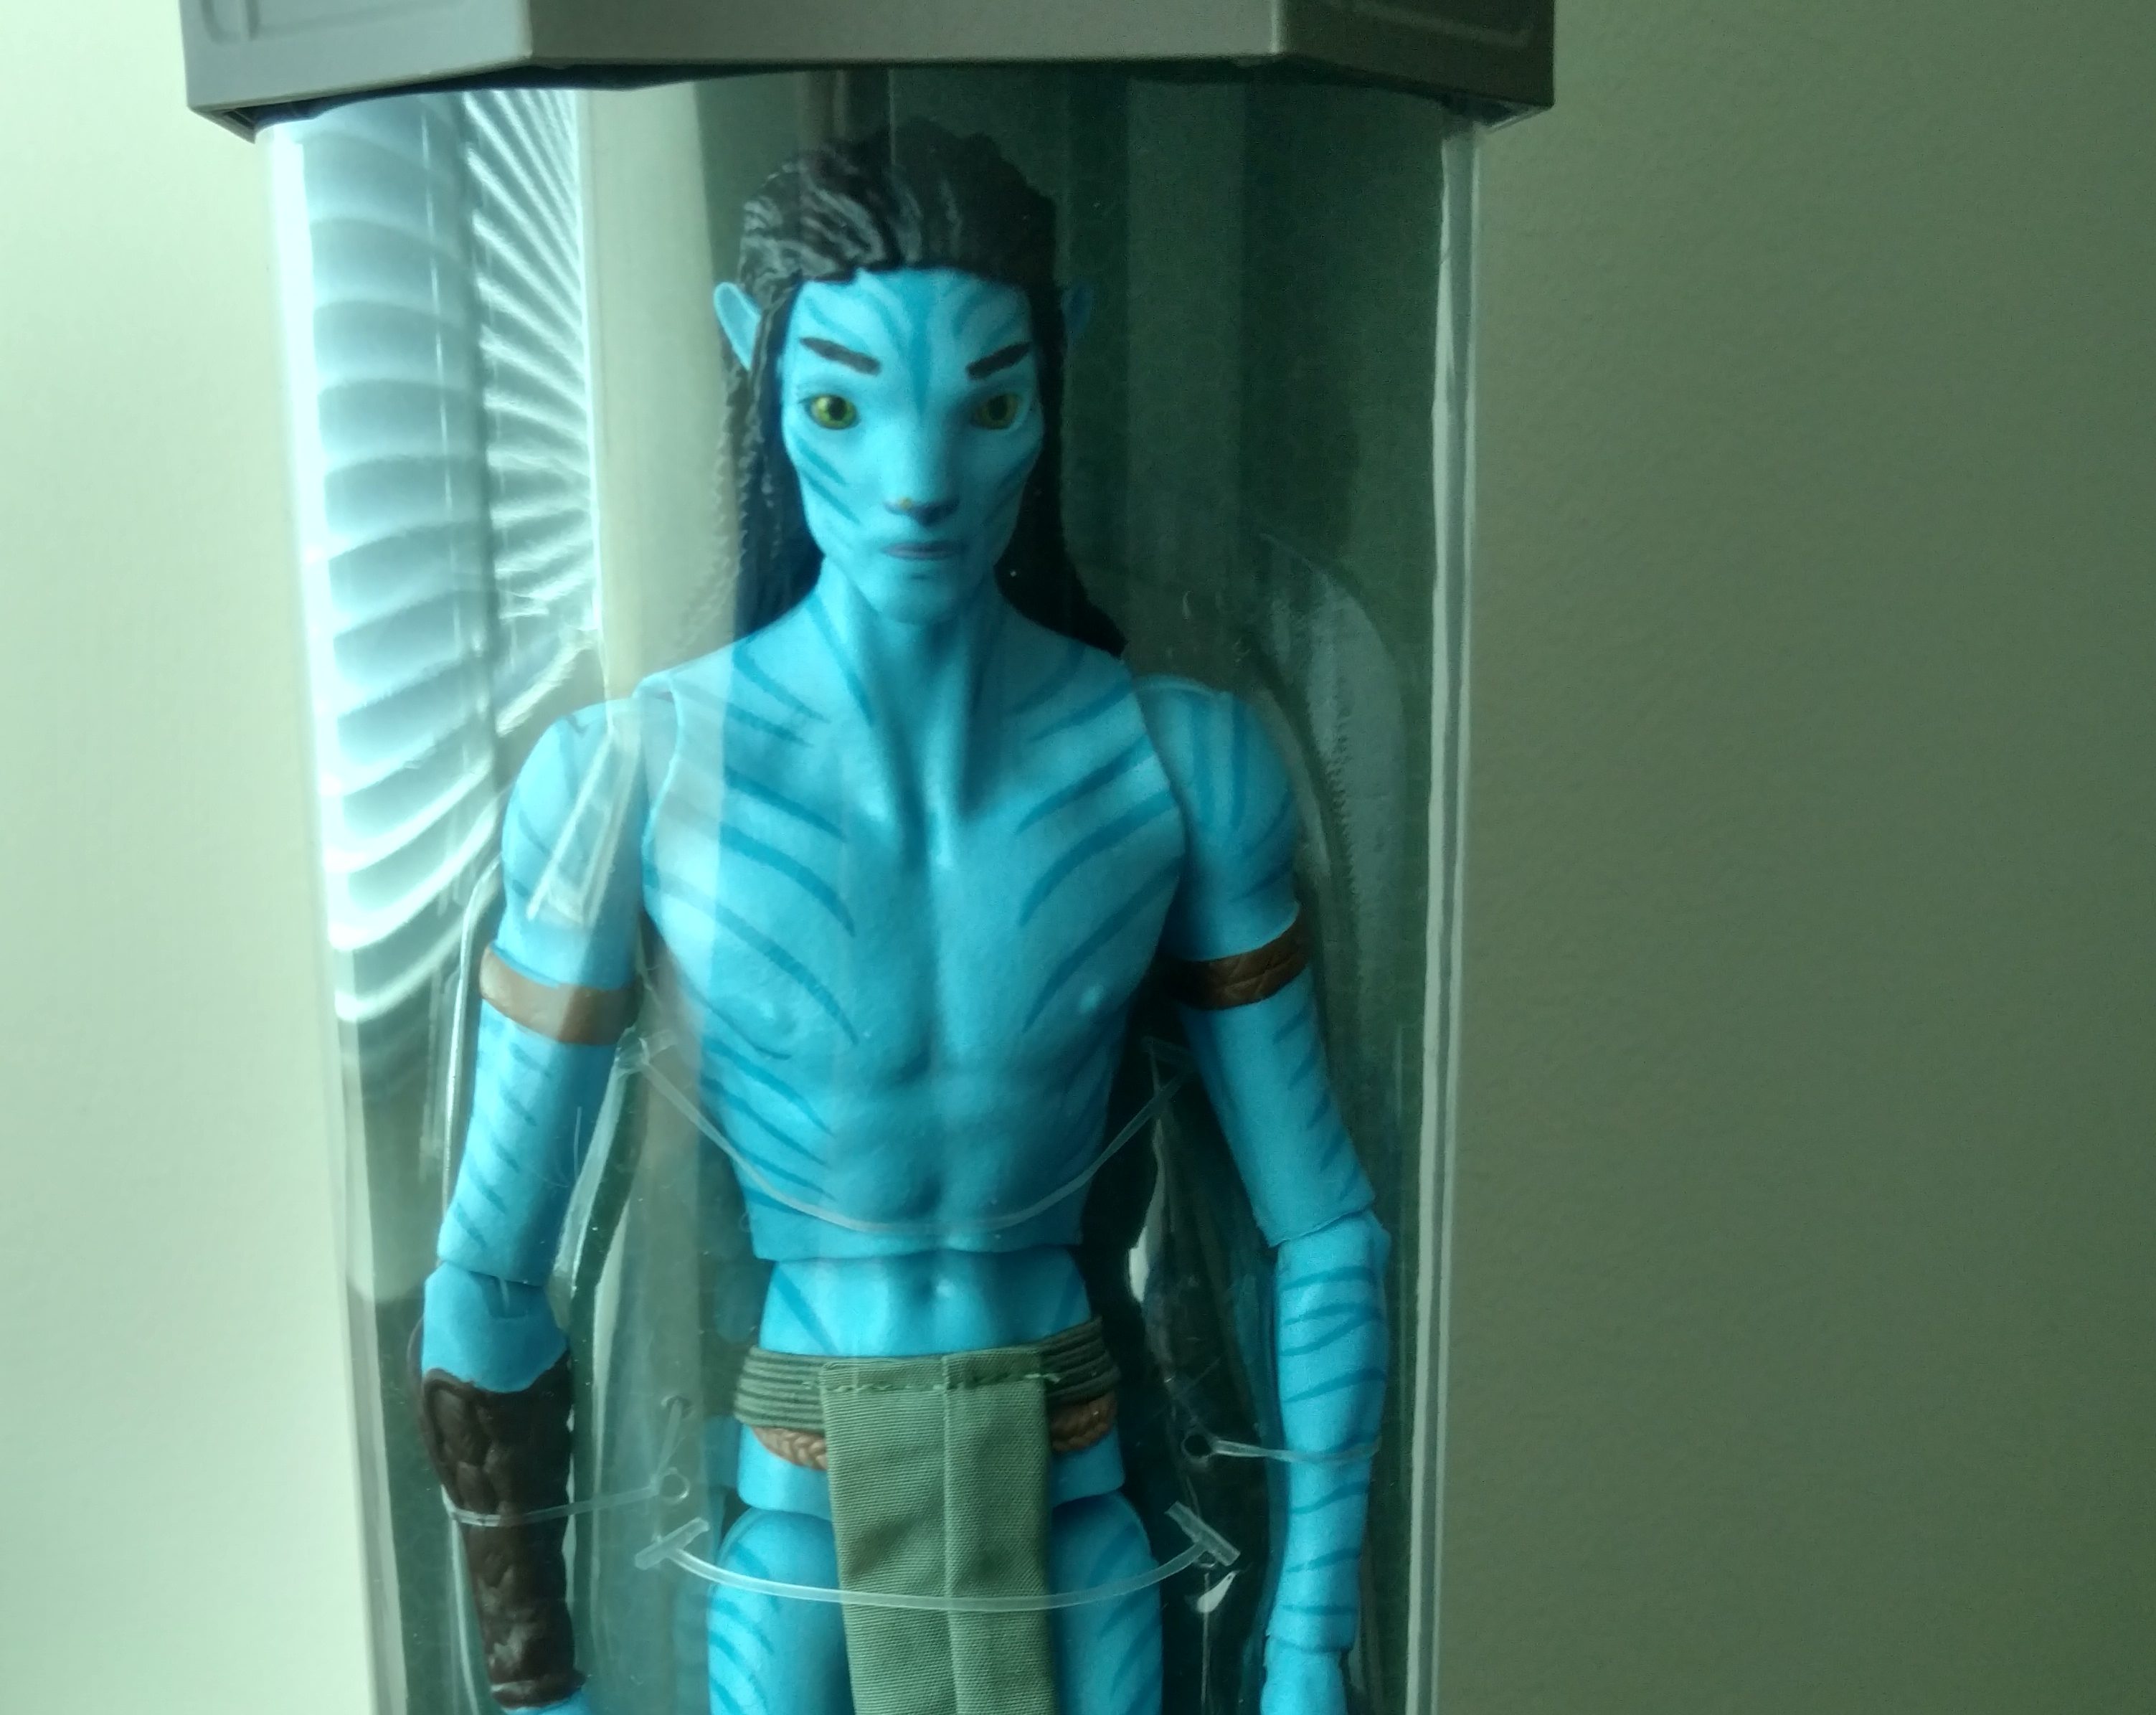 ACE Avatar Maker Puts Your Face on an Avatar Action Figure For $75